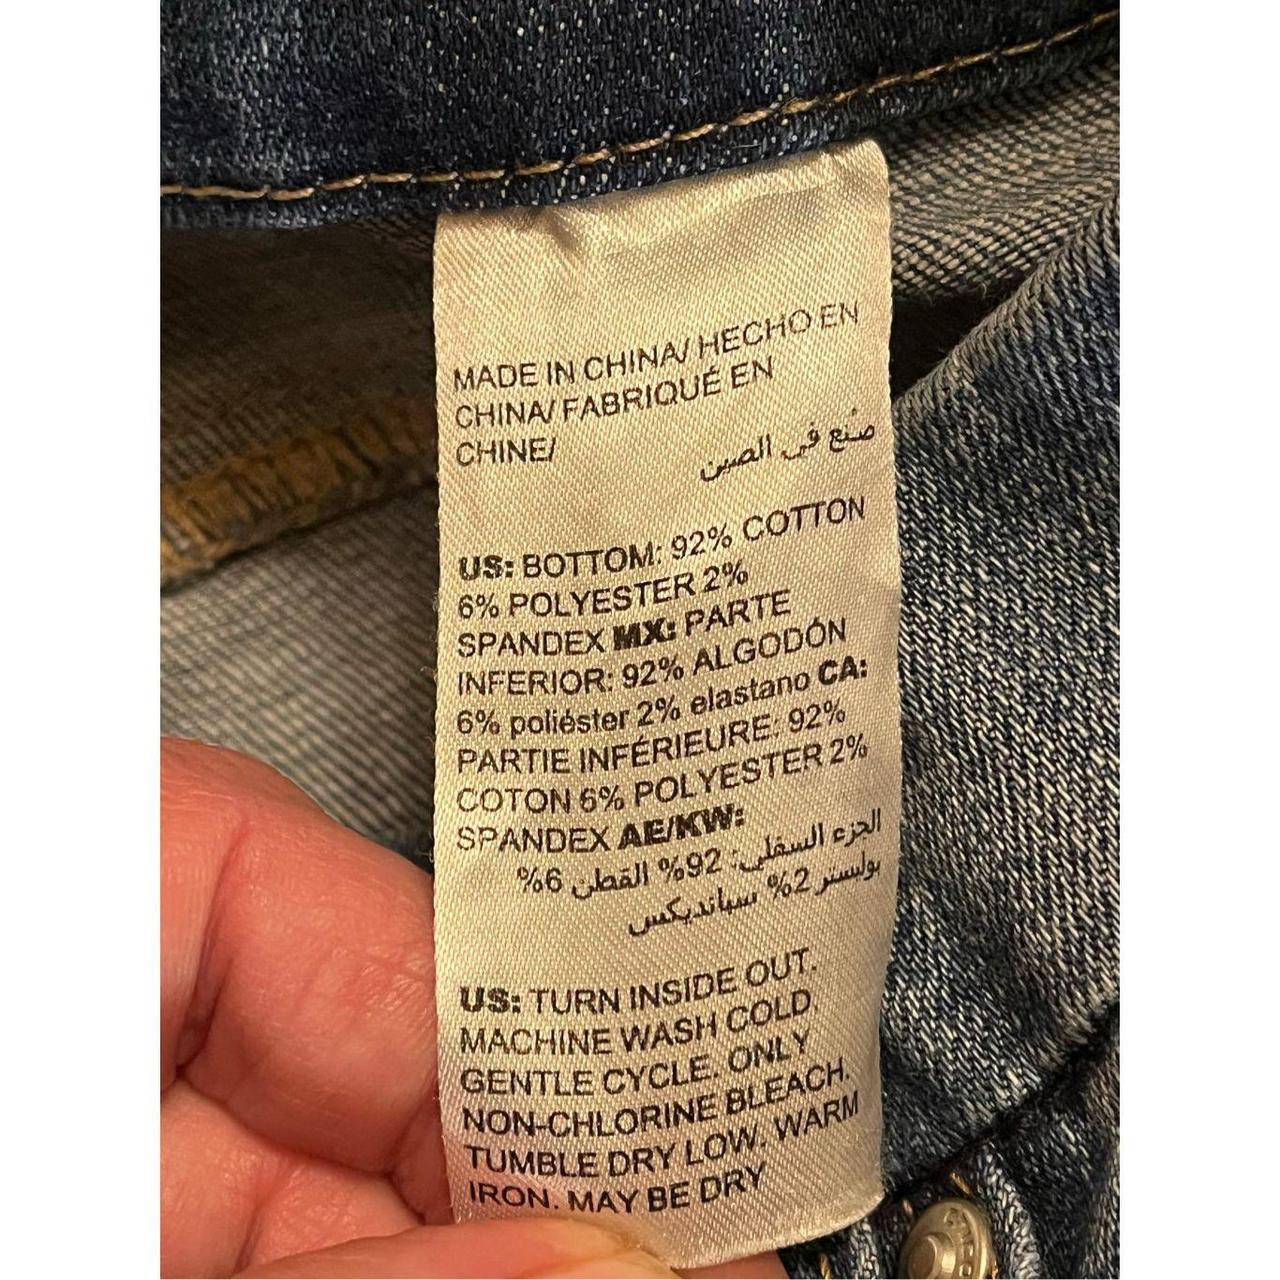 Title: Chico's So Slimming Girlfriend Ankle Jeans - Depop